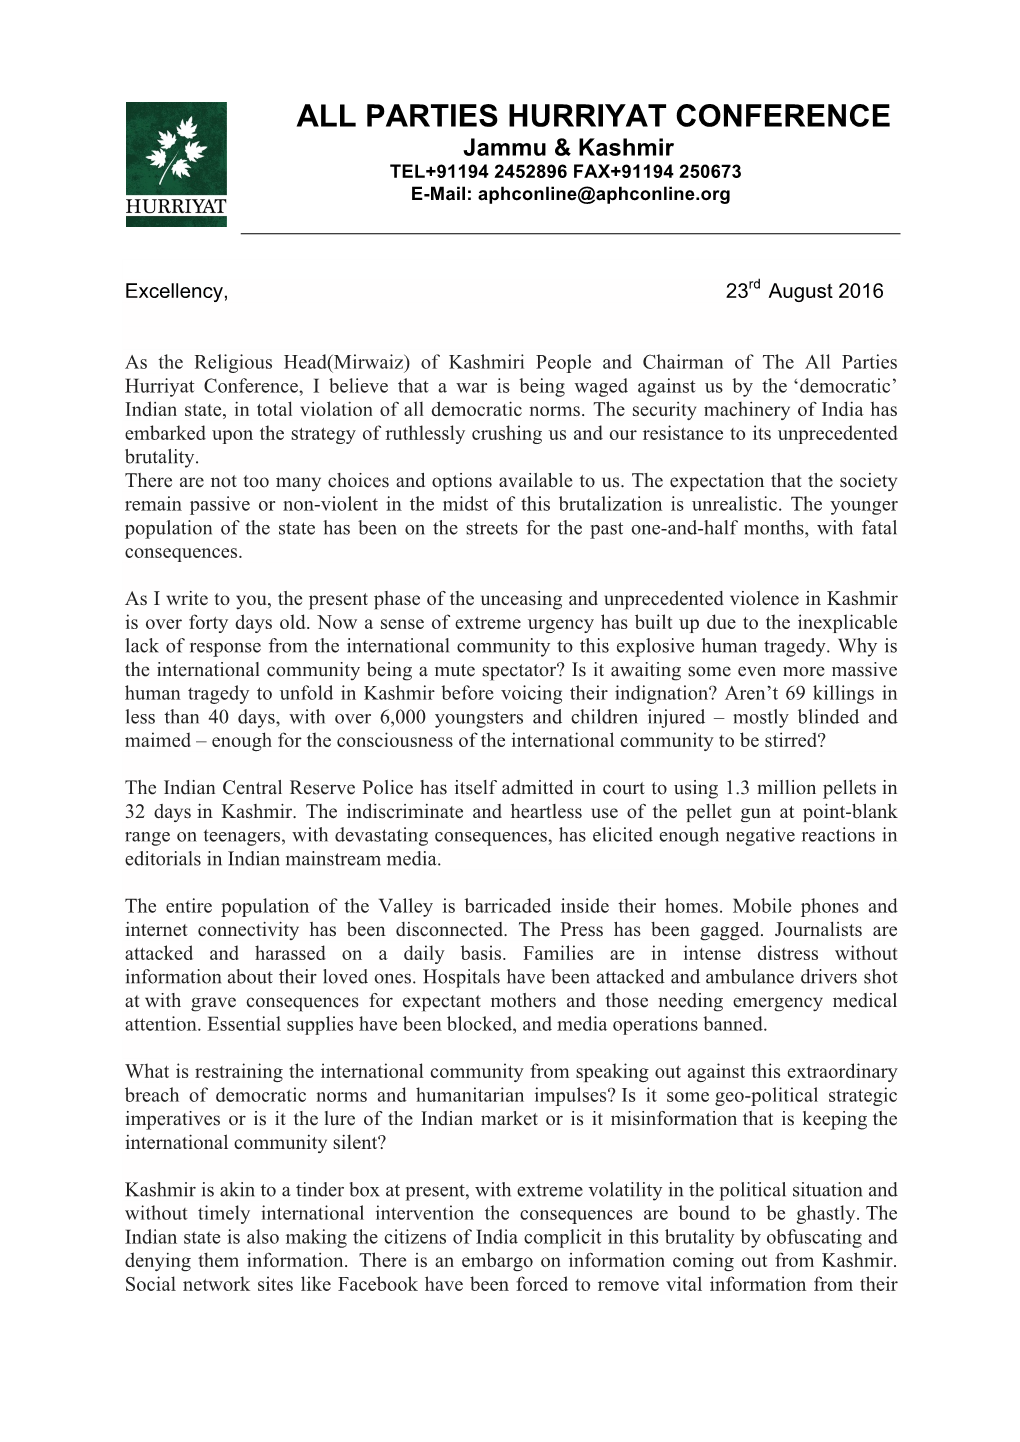 Letter of Mirwaiz Chairman of the All Parties Hurriyat Conference